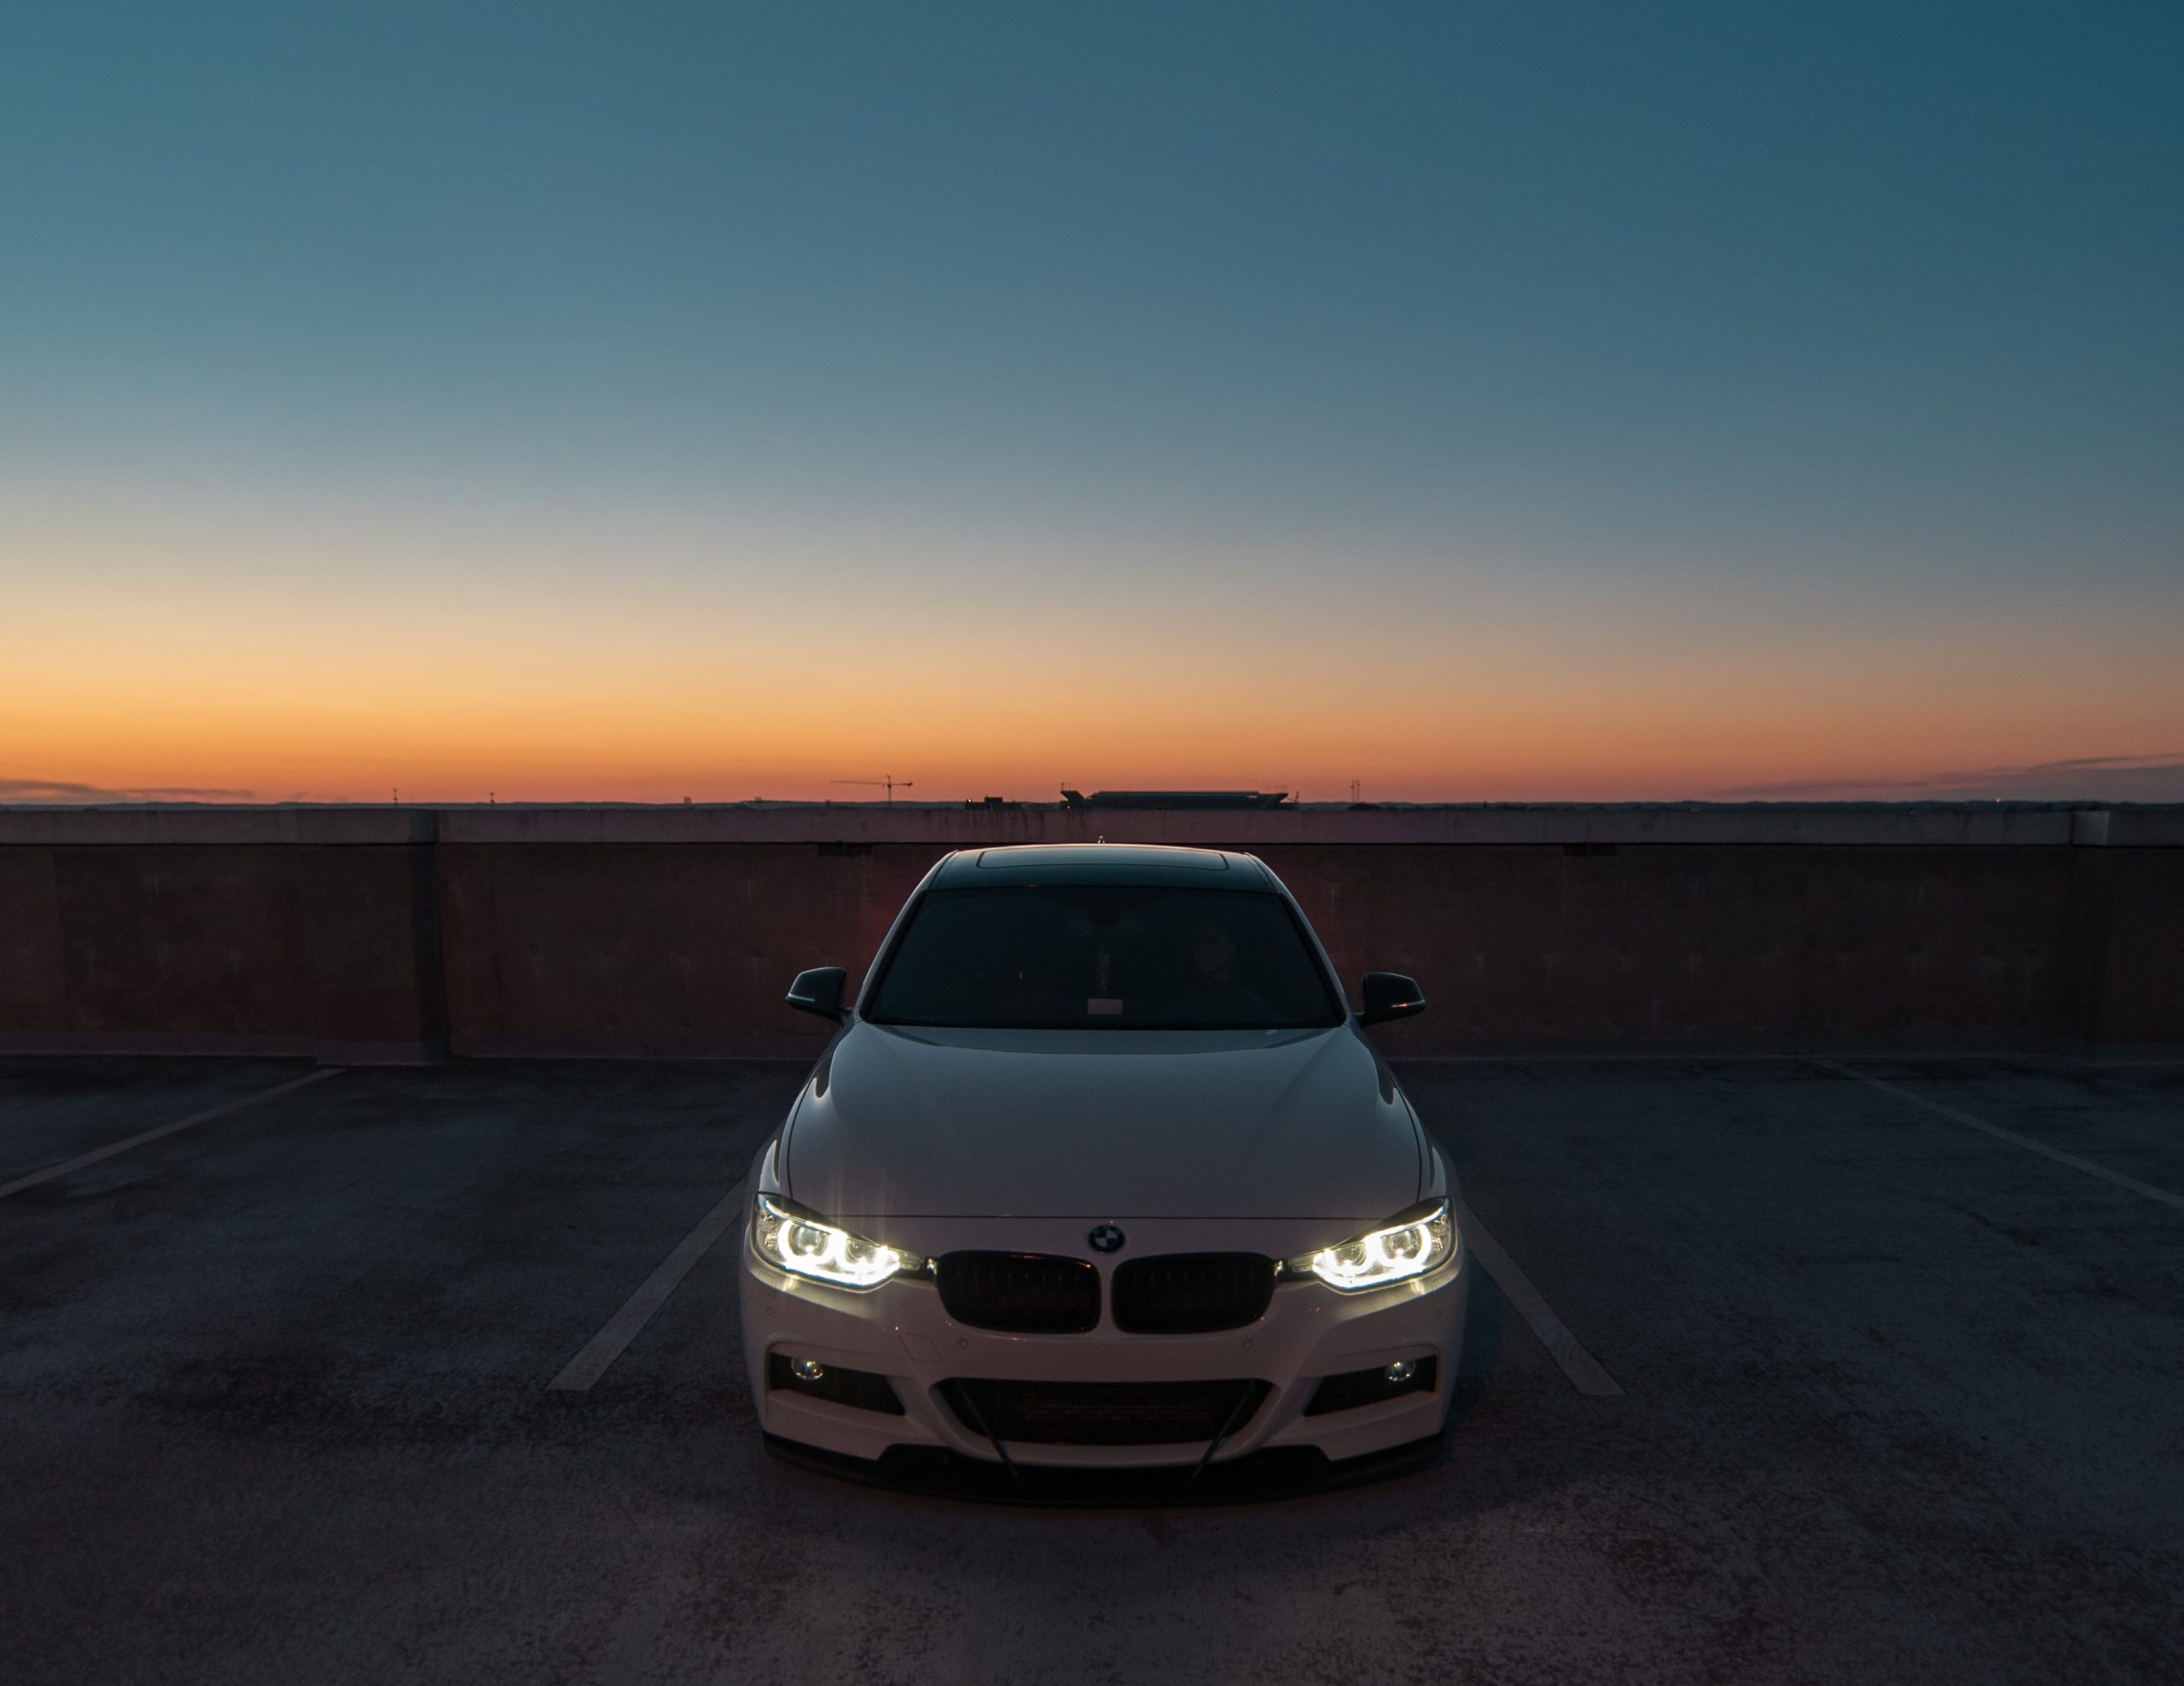 What are the main differences between basic BMW, M Sport, M Performance, and M Competition